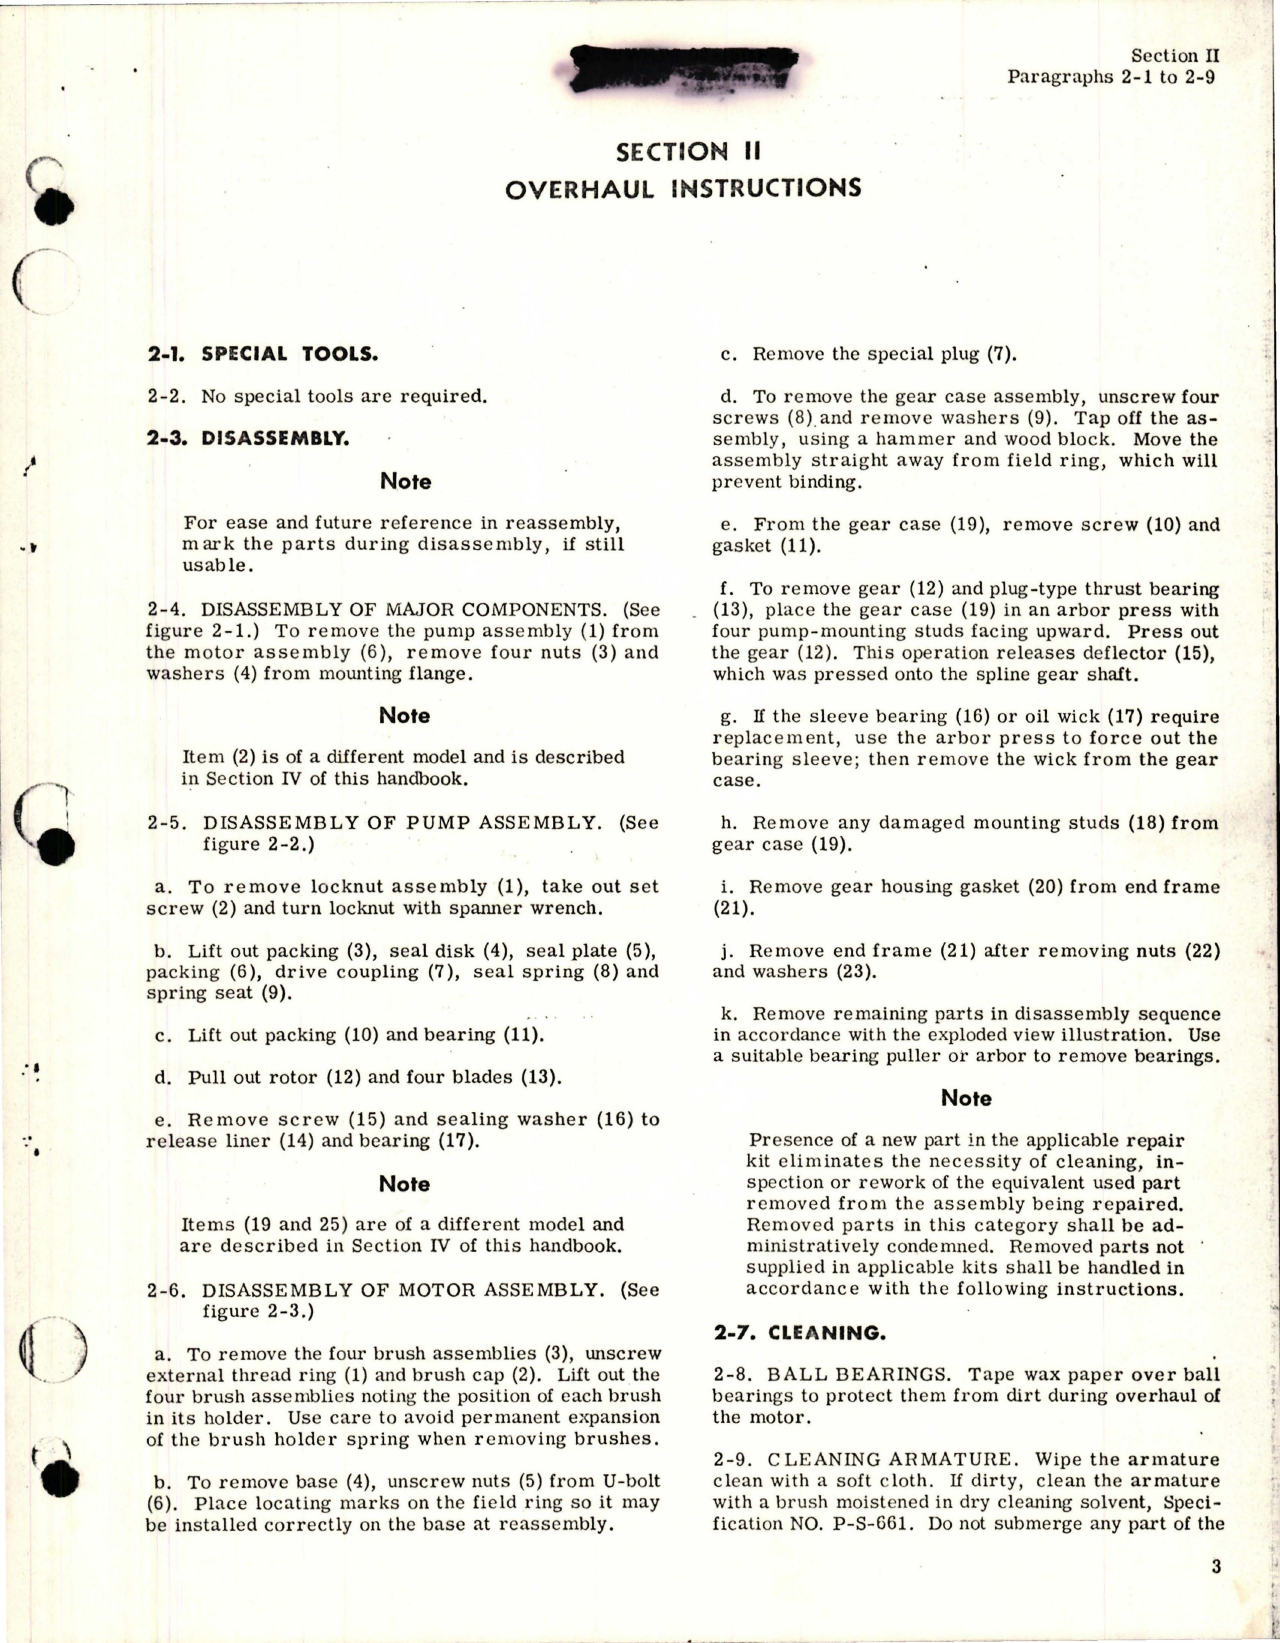 Sample page 7 from AirCorps Library document: Overhaul Instructions for Electric Motor Driven Hydraulic Oil Pump Assembly - Parts RG6100E1 and RG6100H 